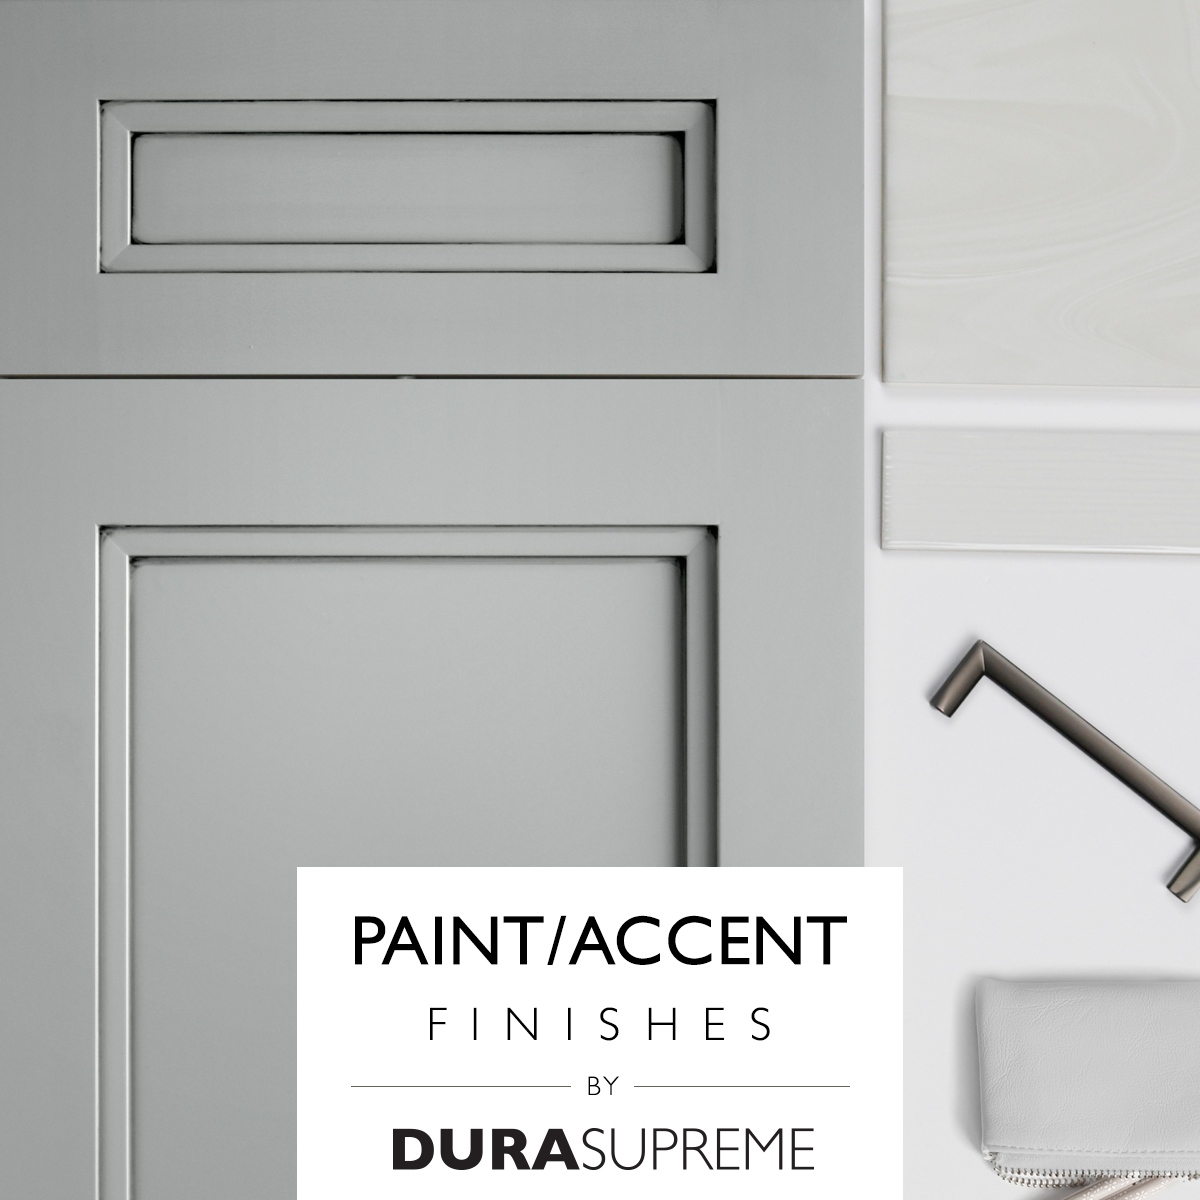 With a Paint Glaze finish, the Accent #Glaze is hand-applied over the paint with a small brush to the profiles, corners, and edges of the door to accentuate the details of the door...

Browse our finishes… 
durasupreme.com/cabinet-finish…

#durasupreme #cabinets #paintedcabinets